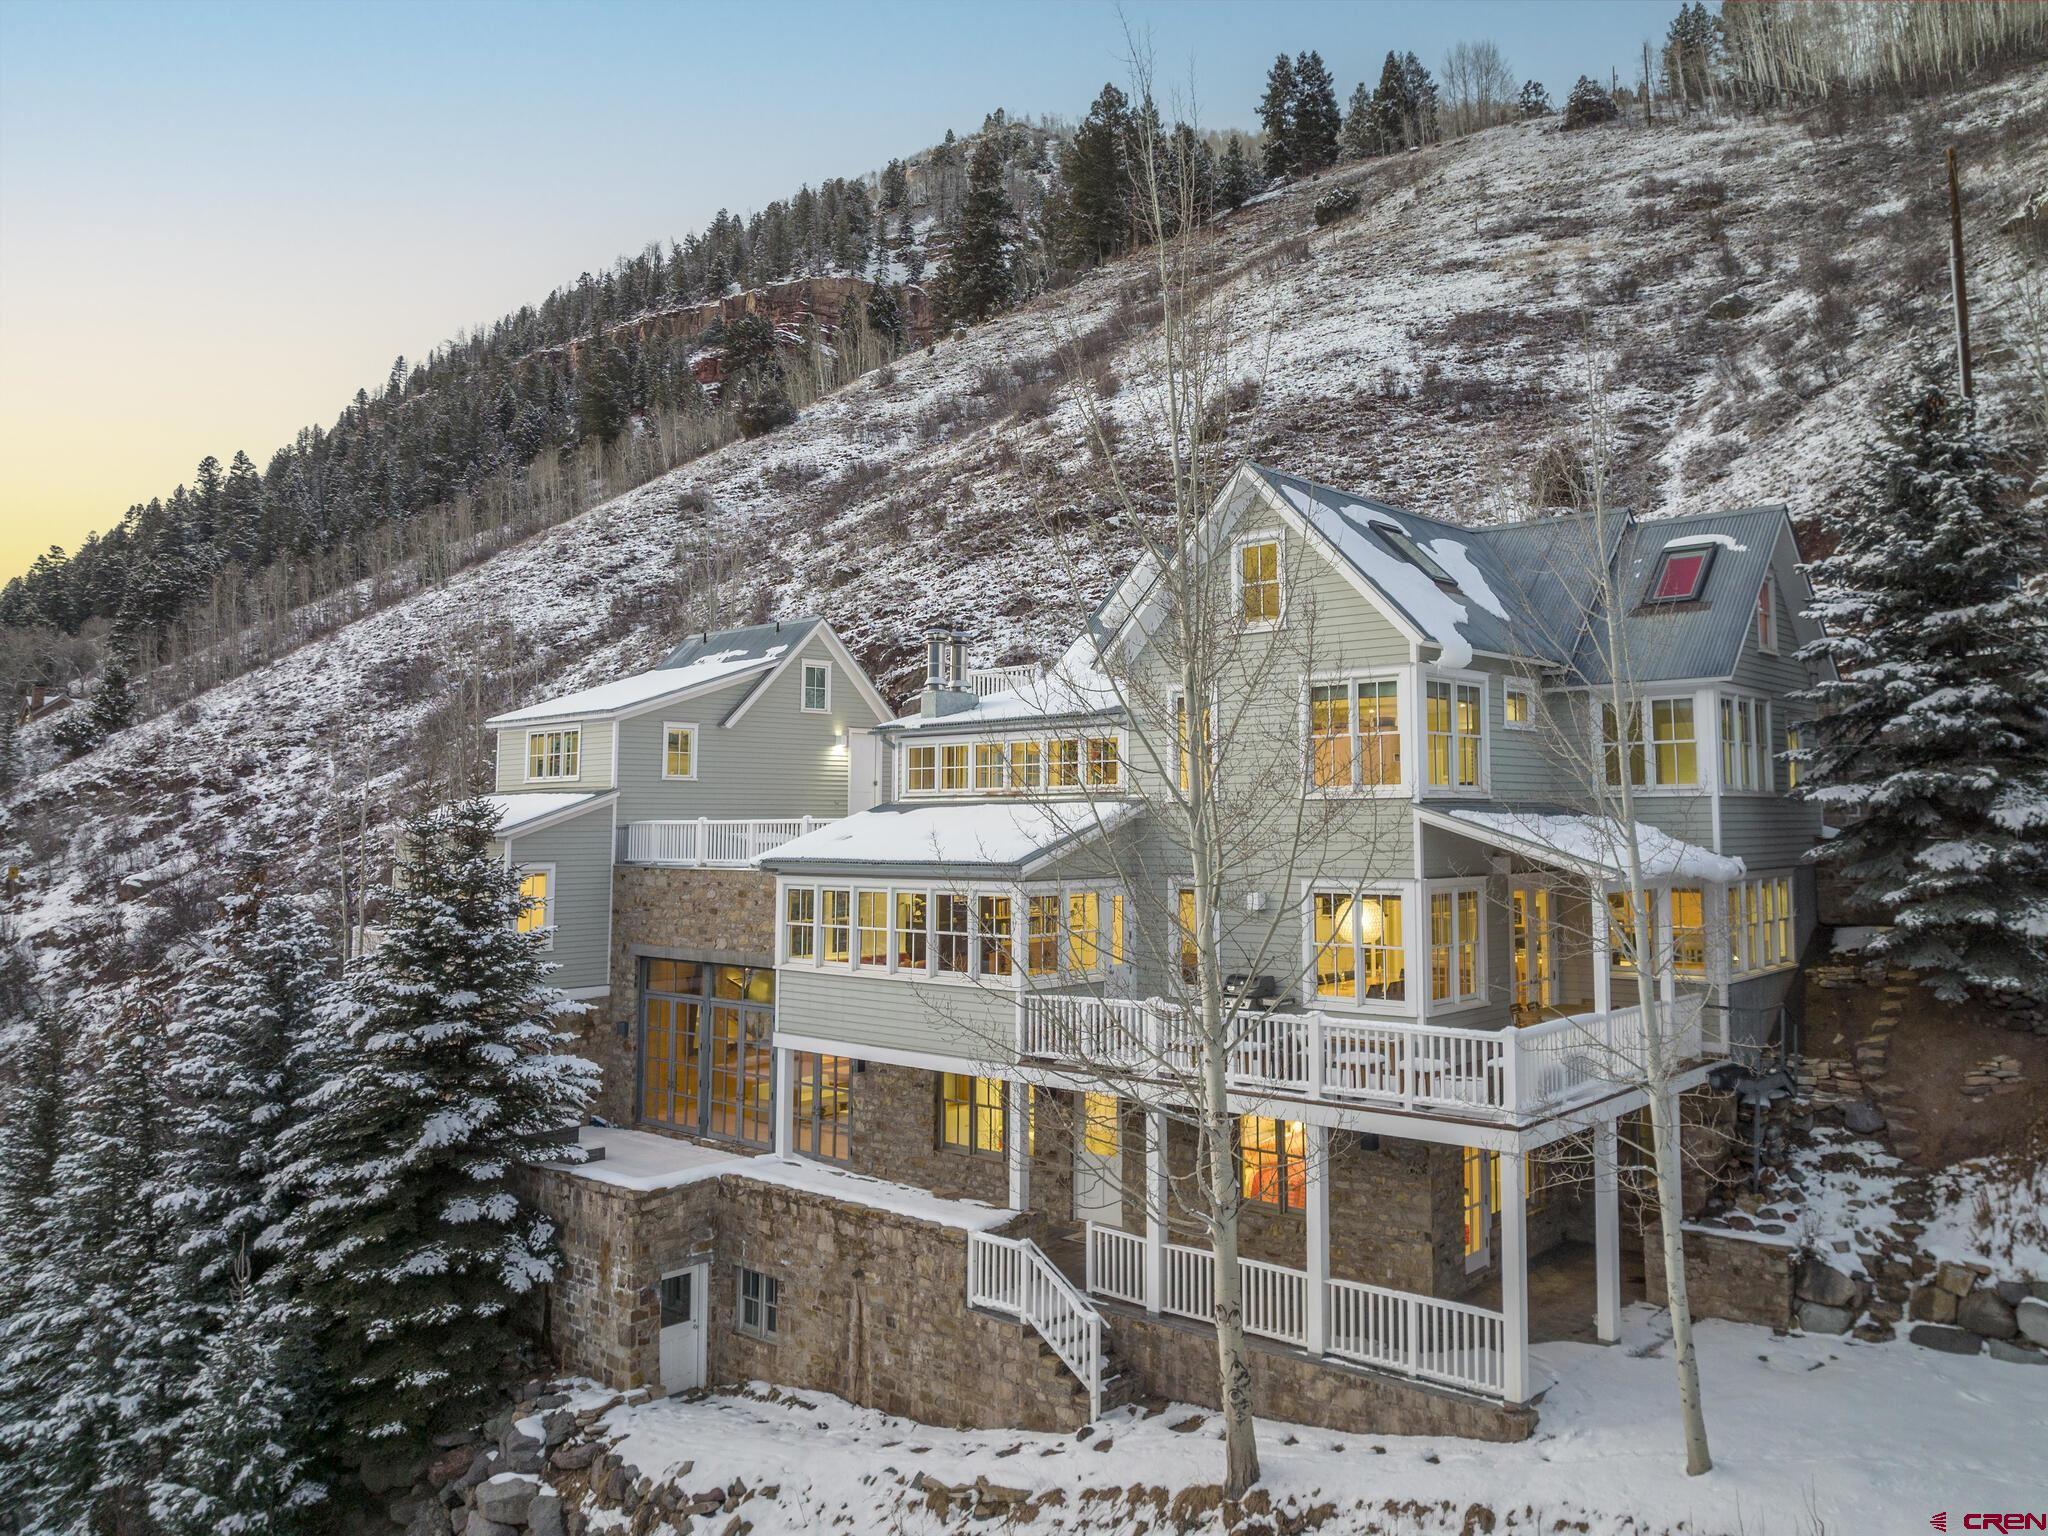 With views overlooking the historic town of Telluride and ski area along with sweeping vistas of the towering Peaks of Ajax, Ballard and Wasatch mountains, this stunning residence offers 6983 square feet with 8 bedrooms and 5.5 baths including a 2 bedroom, 1 bath guest/caretaker suite. A spacious great room features a floor to ceiling fireplace and walls of windows to enjoy the sun drenched panoramic views. On the lower level is another large entertainment space with loft and a wall of French doors leading to a spacious terrace and hot tub. Located just five blocks from the gondola, this Telluride home is a dream residence for skiers, hikers, and anyone who wants to escape to the San Juan Mountains.